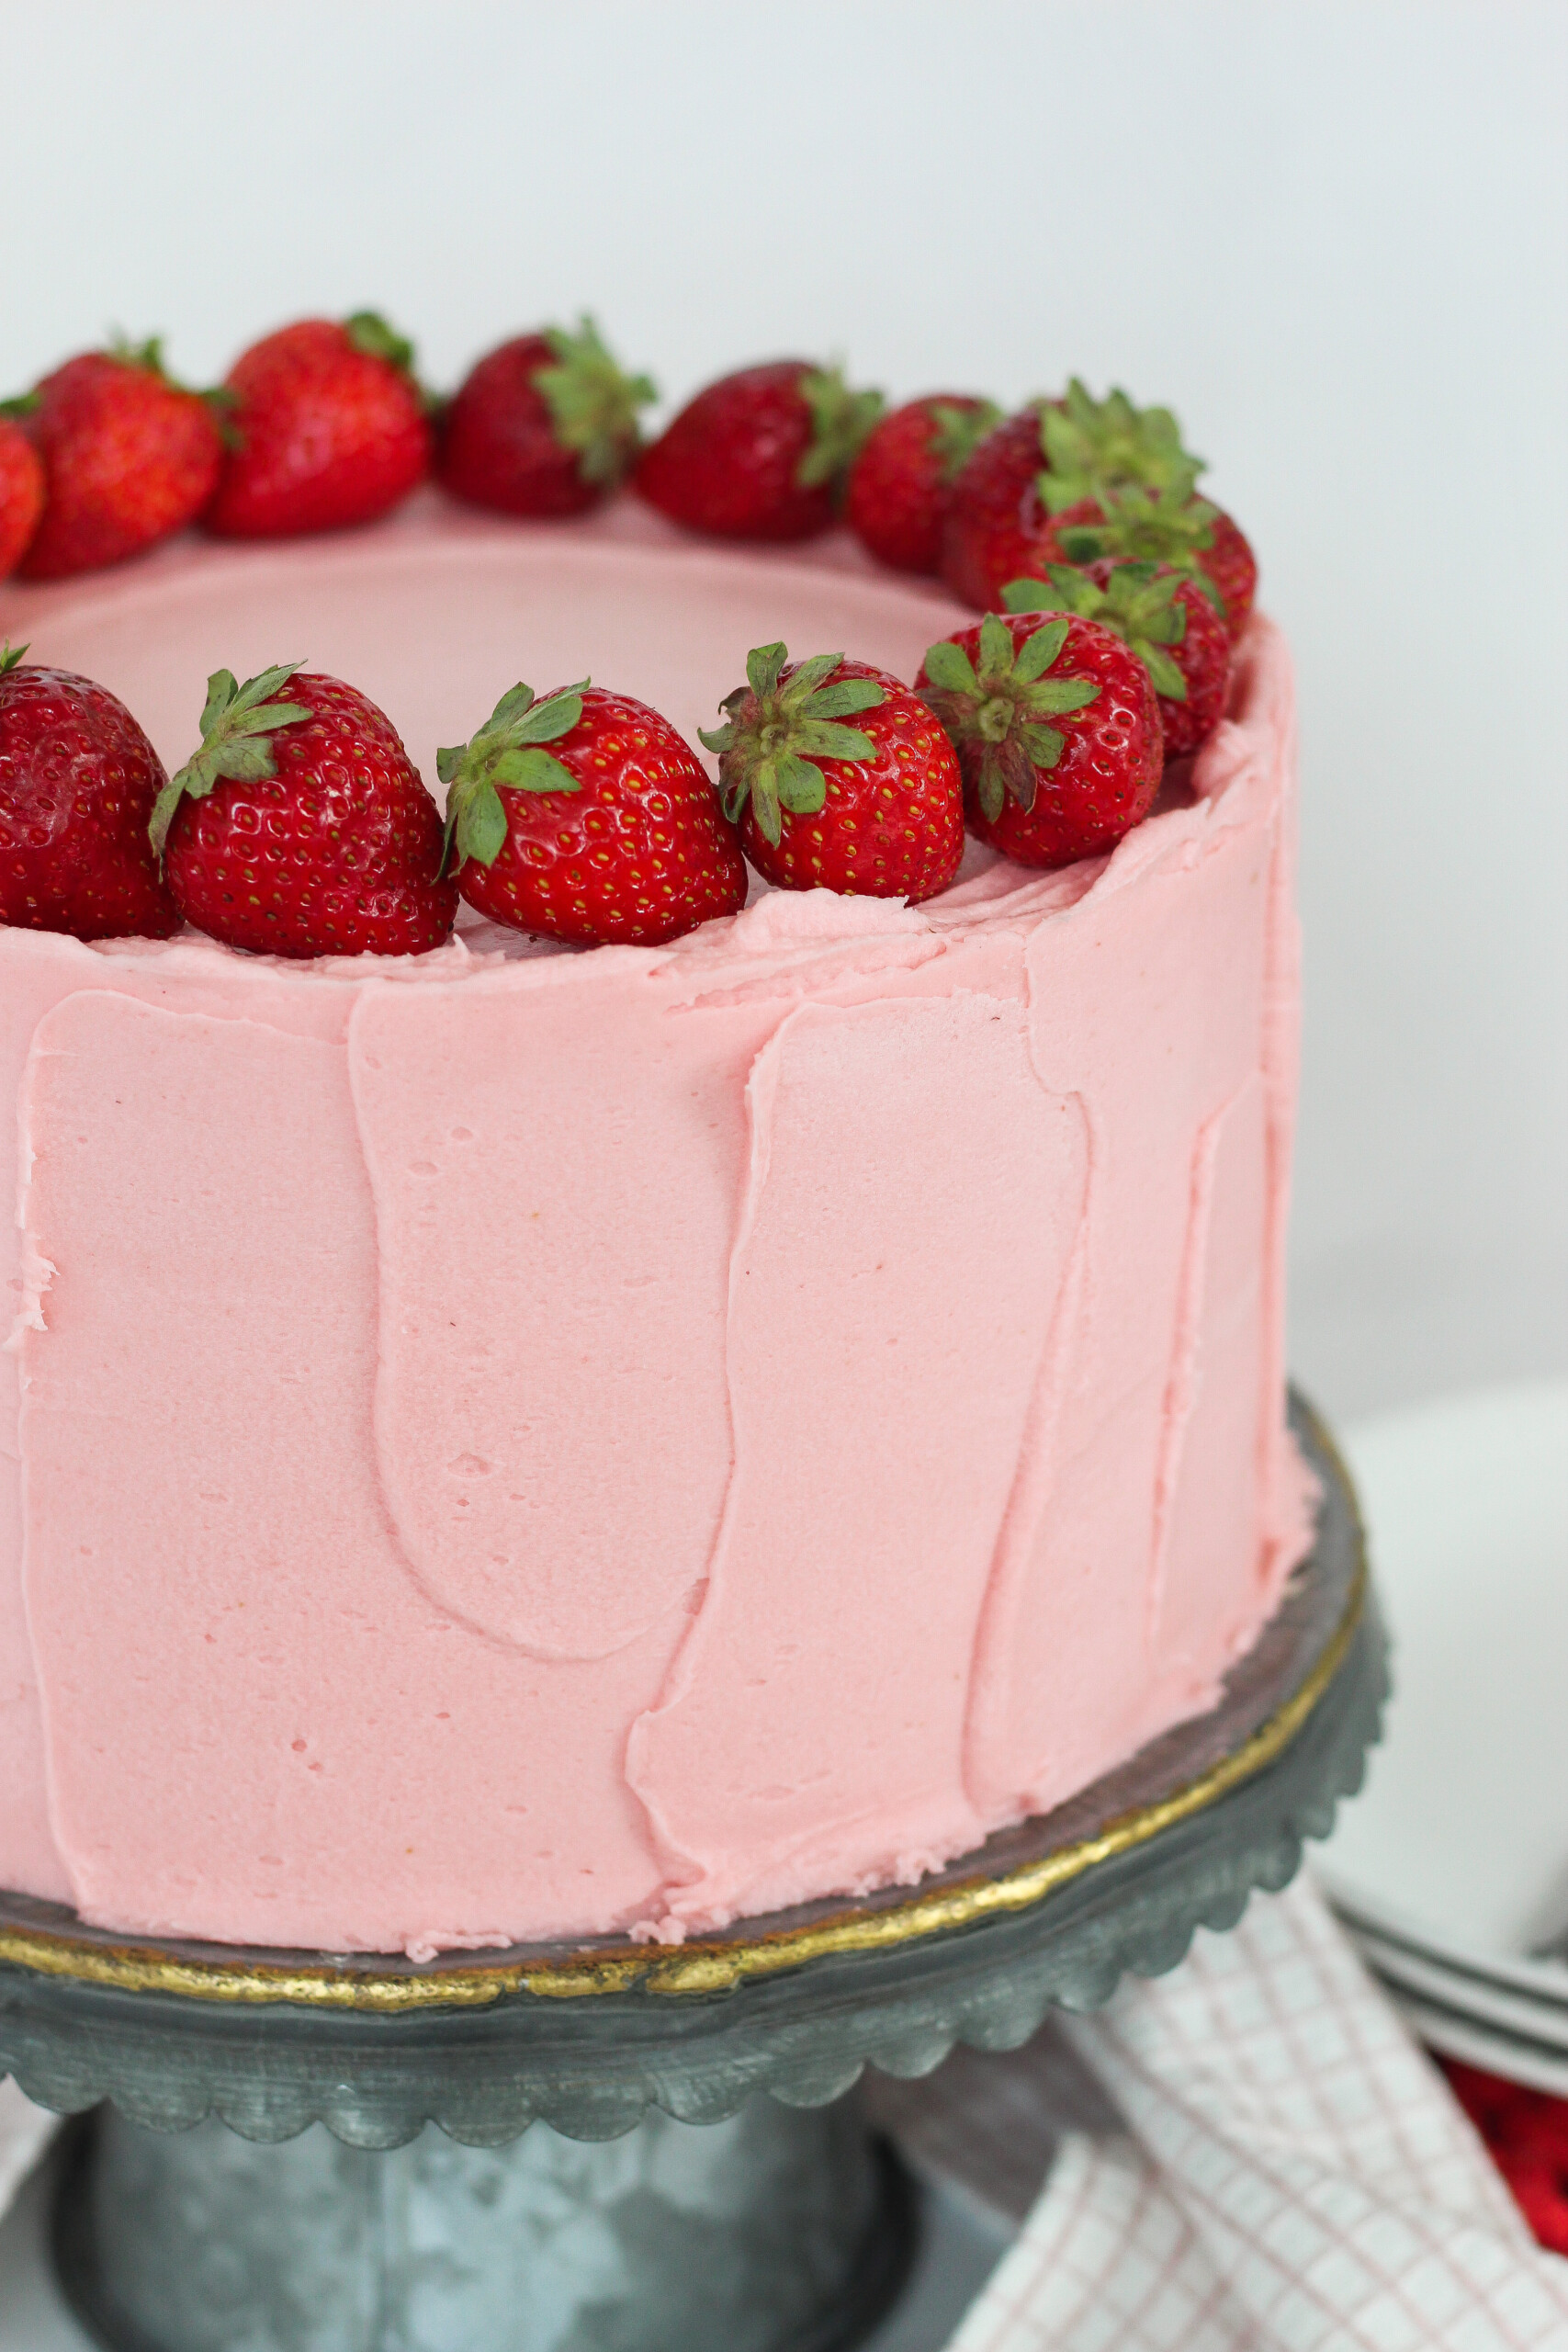 A strawberry cake with strawberry buttercream and fresh strawberries.